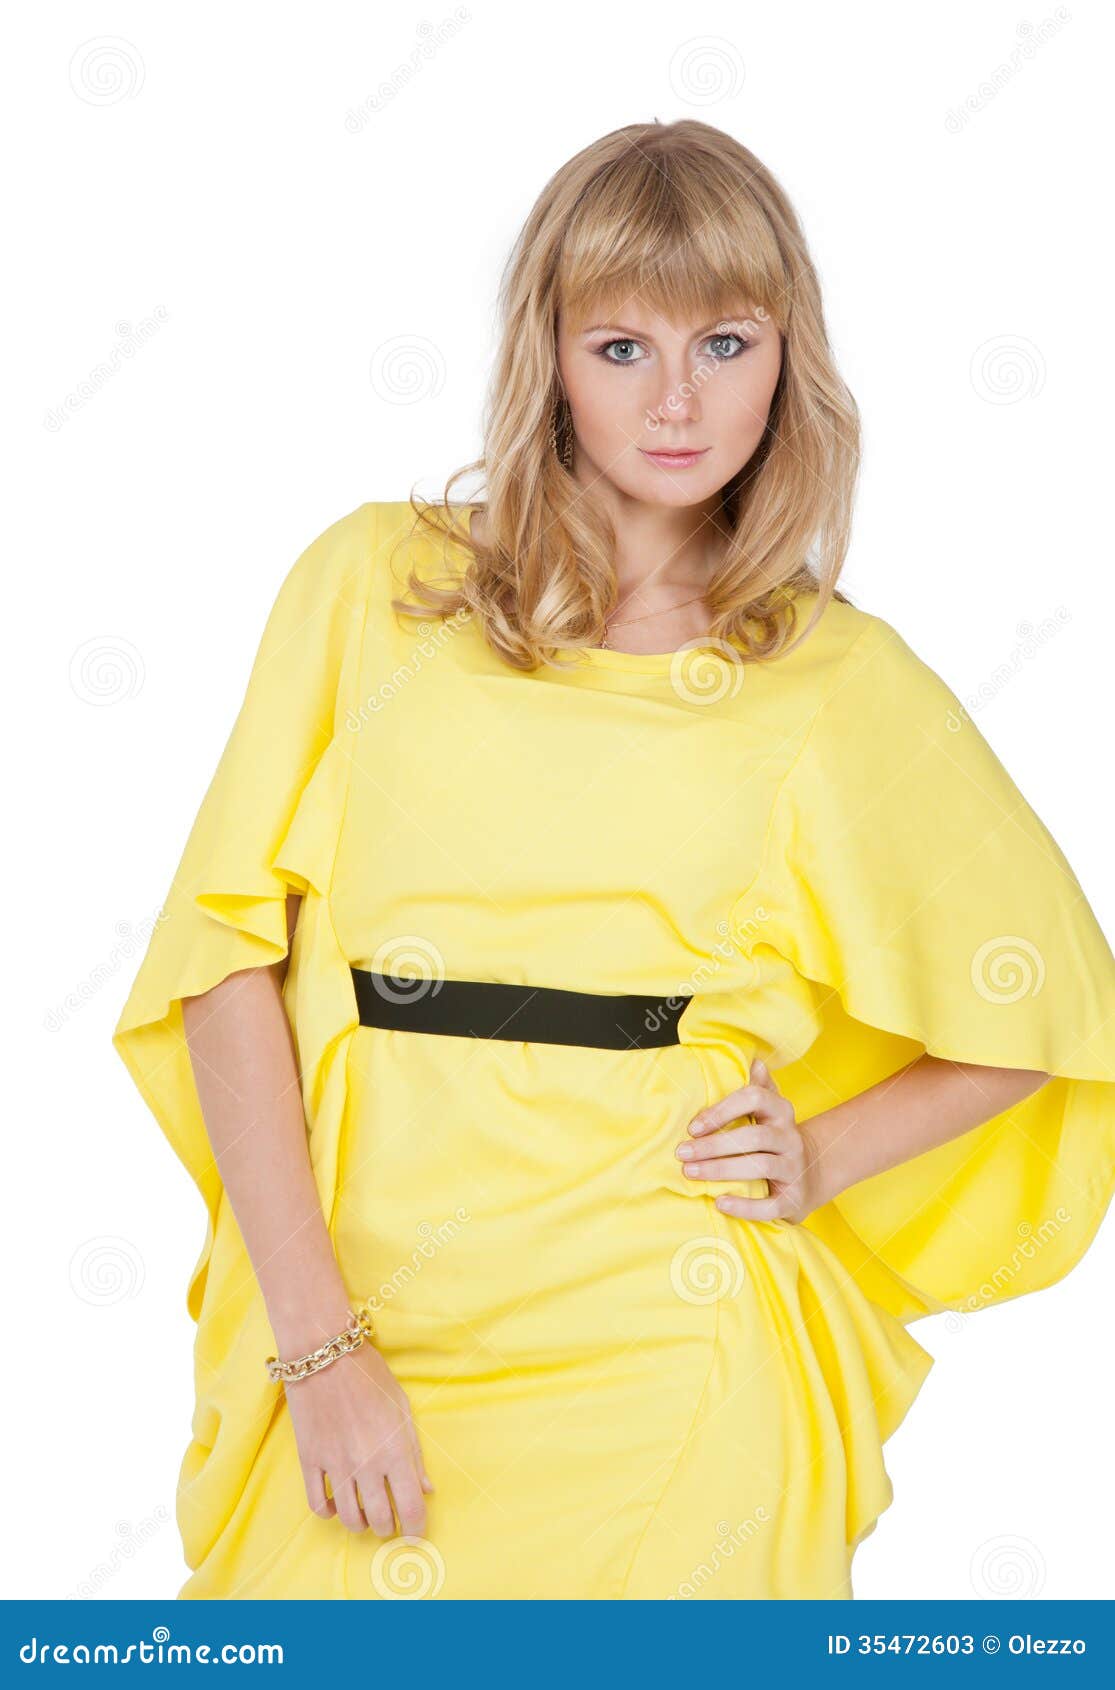 Attractive Blonde In Yellow Dress Stock Image Image Of Hair Emotions